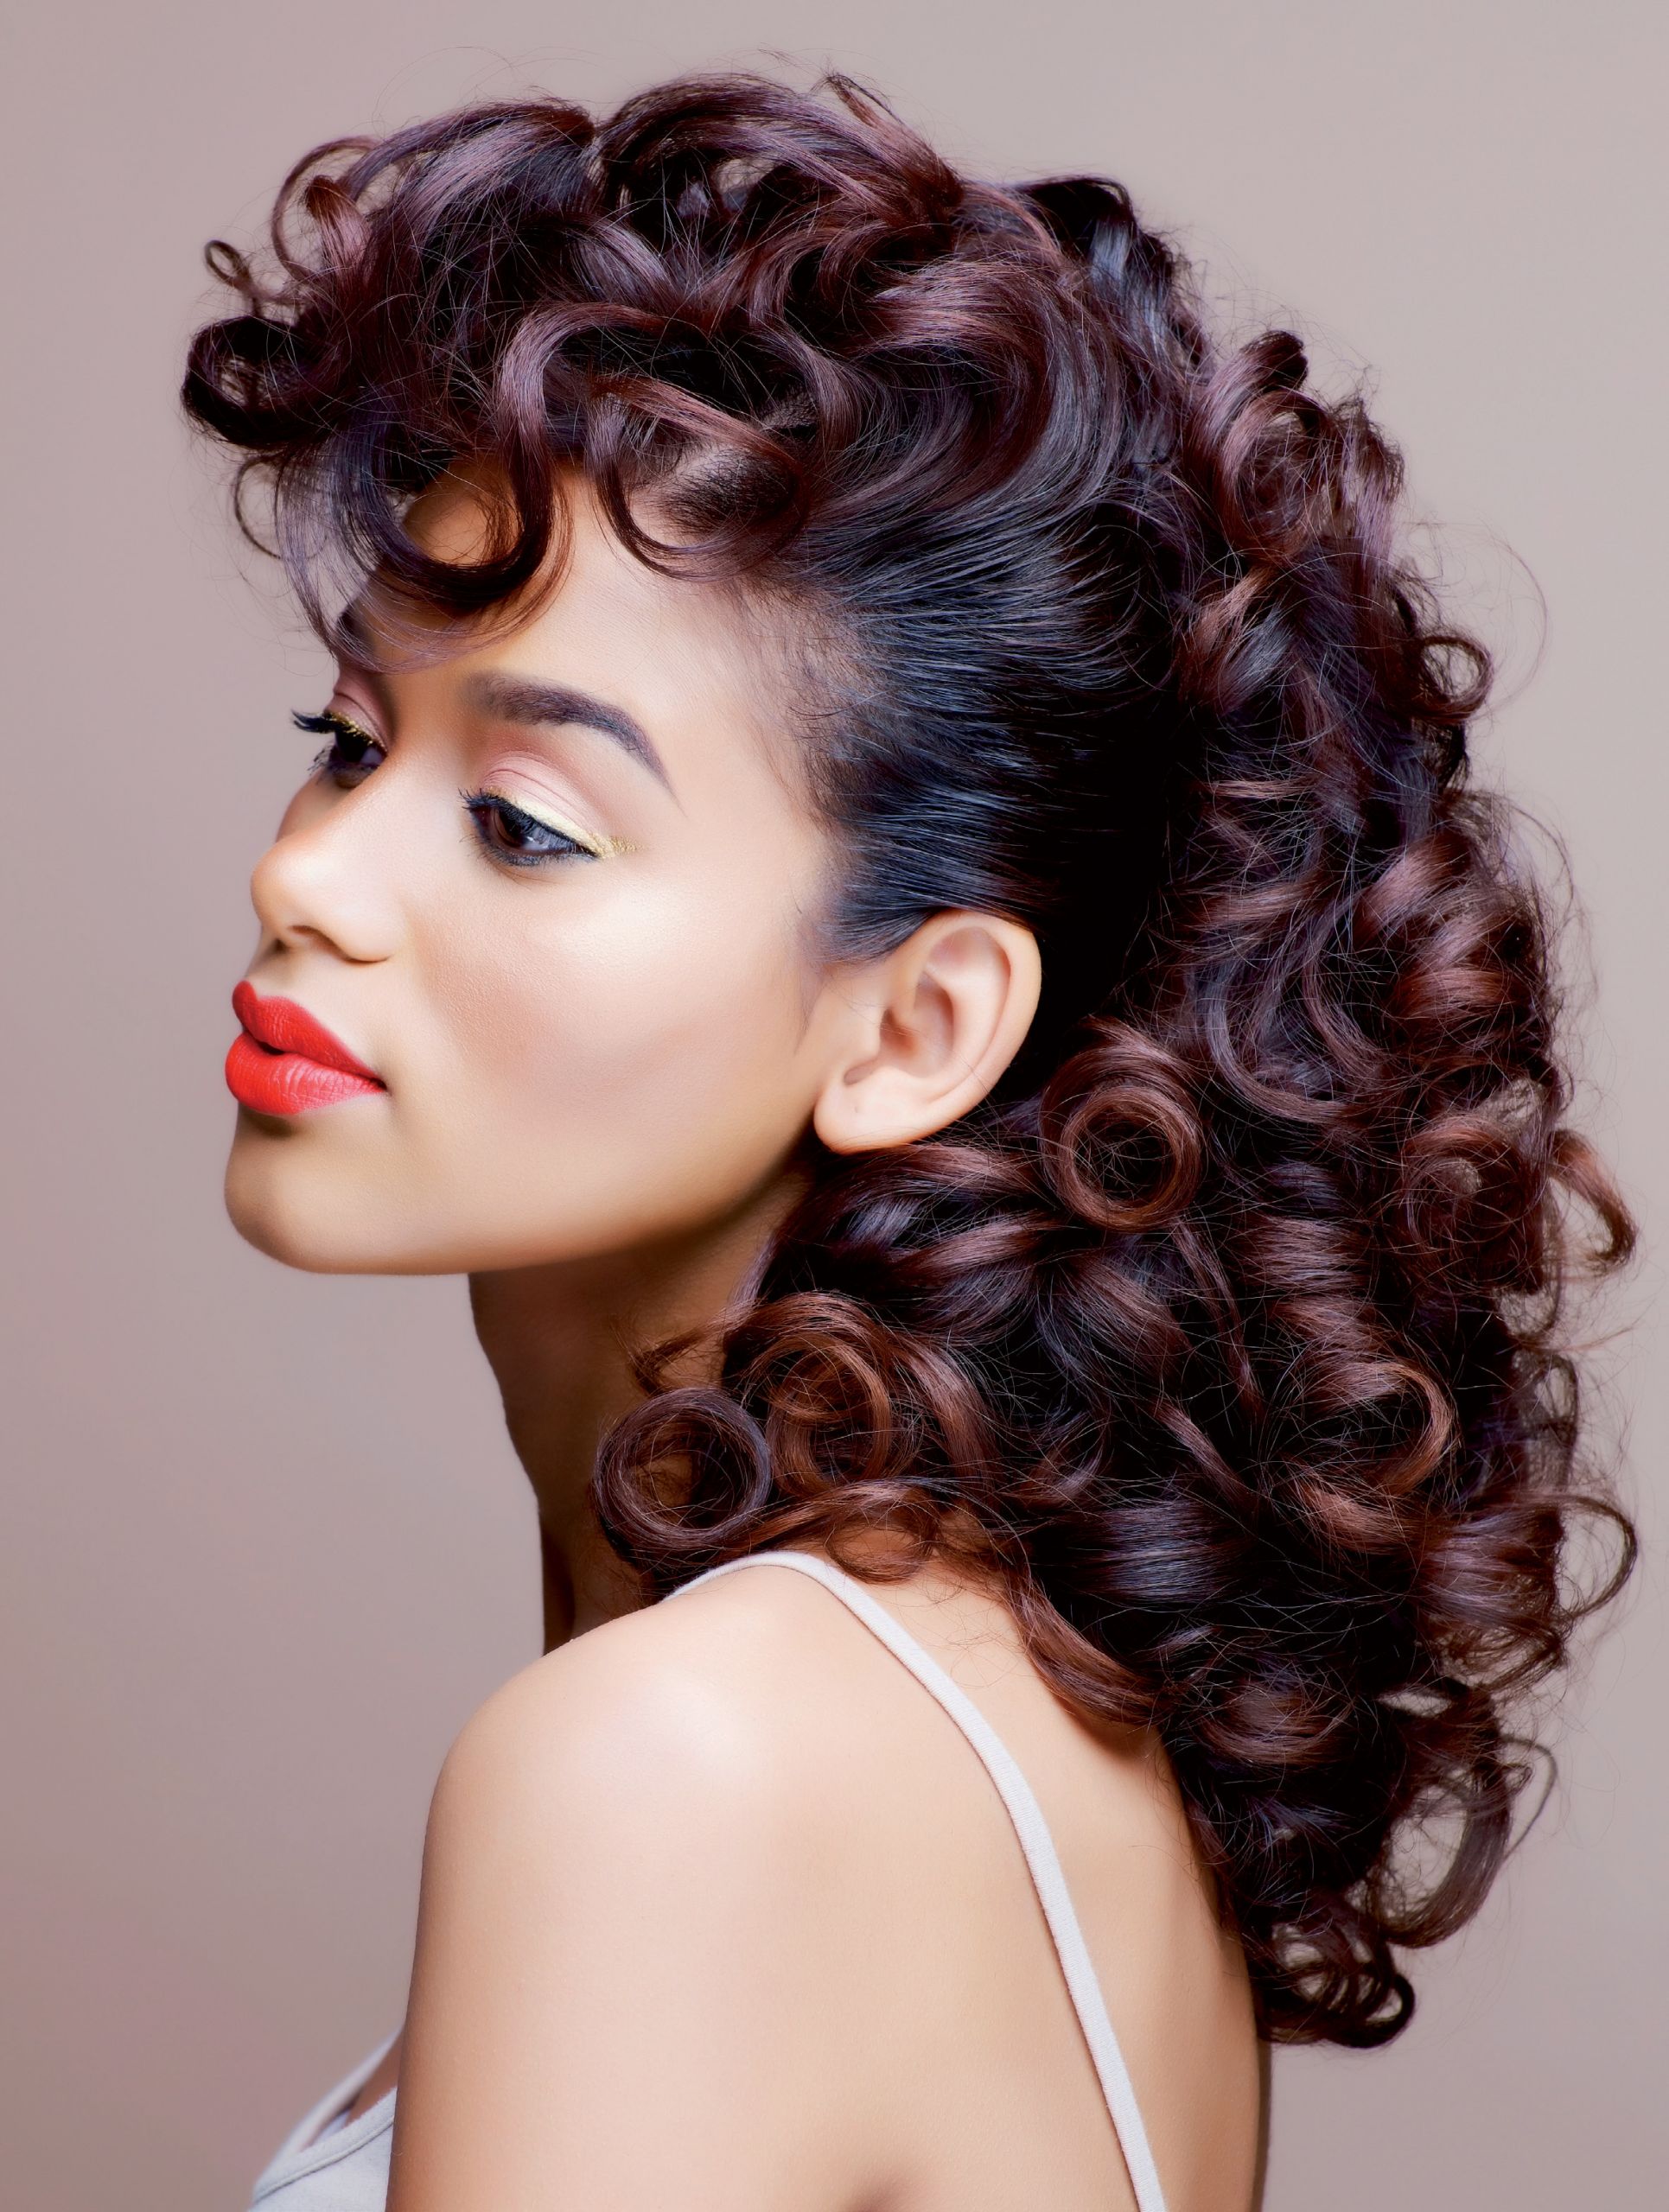 Roller Set Hairstyles For Black Hair
 Queen of Plaits does Roller Set for Destiny Magazine 2013